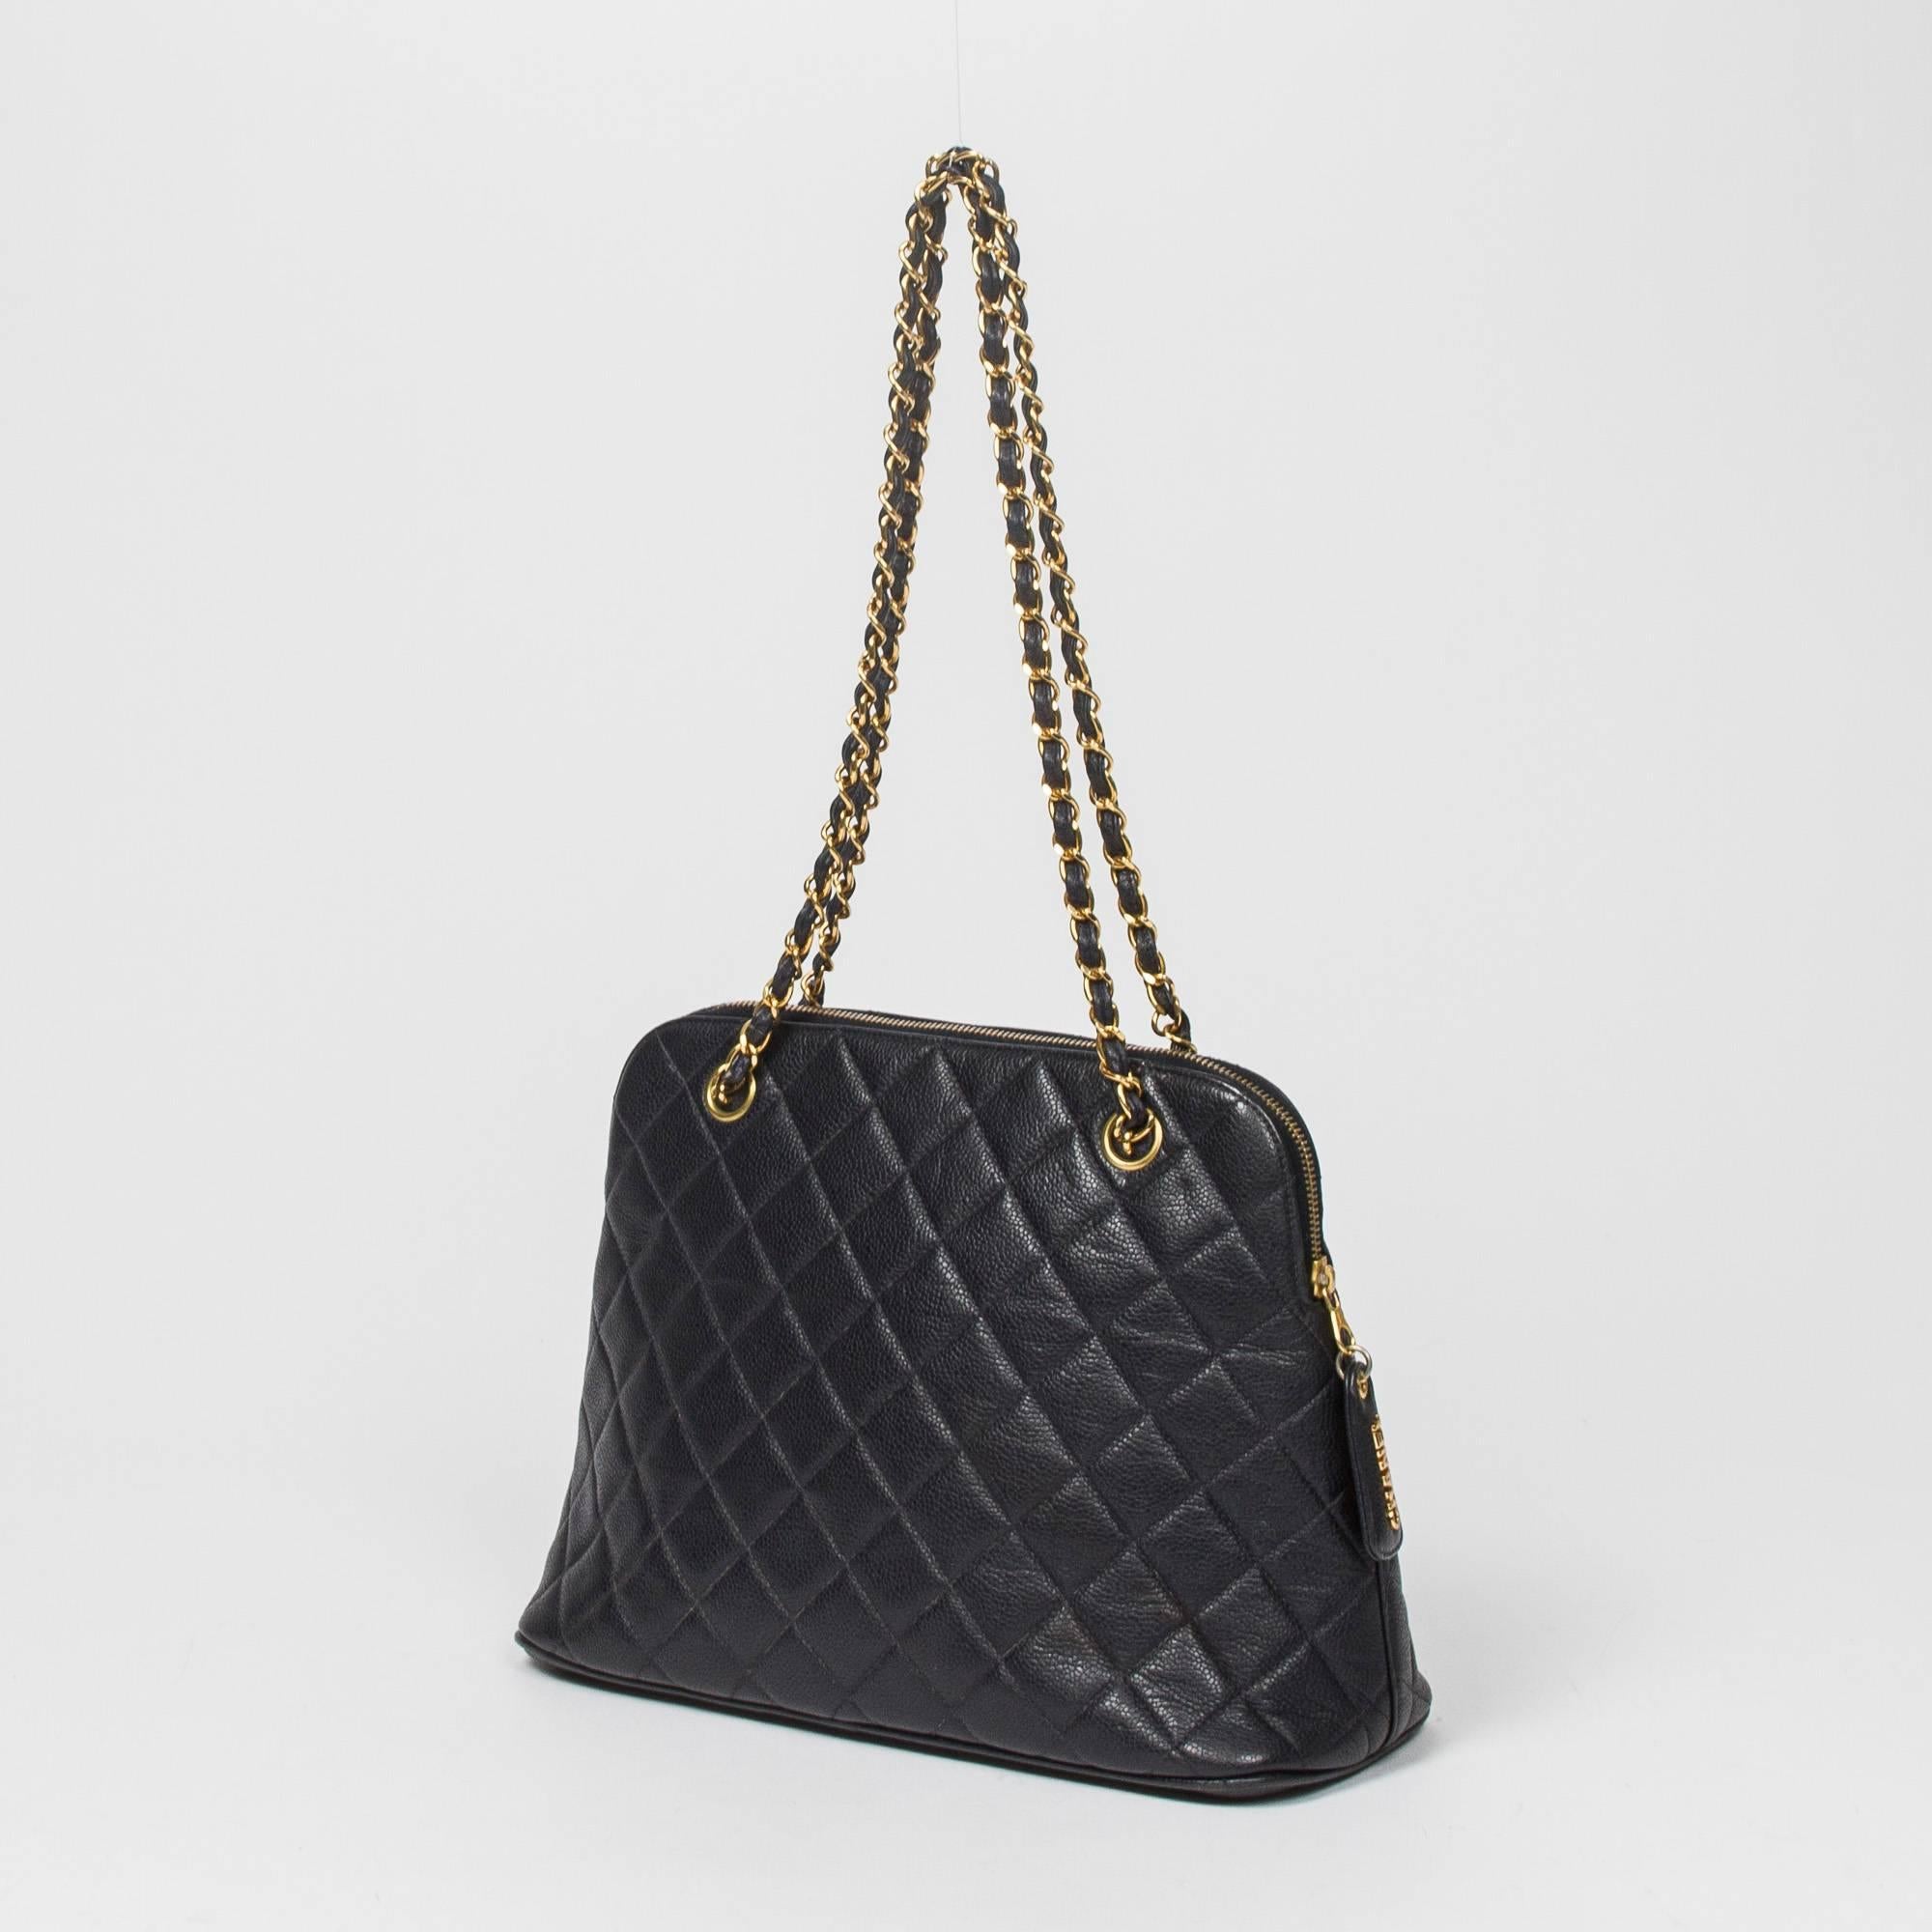 Zip Shoulder Tote in Navy Blue Quilted leather with gold tone chain strap interlaced with blue leather. Zip closure with 